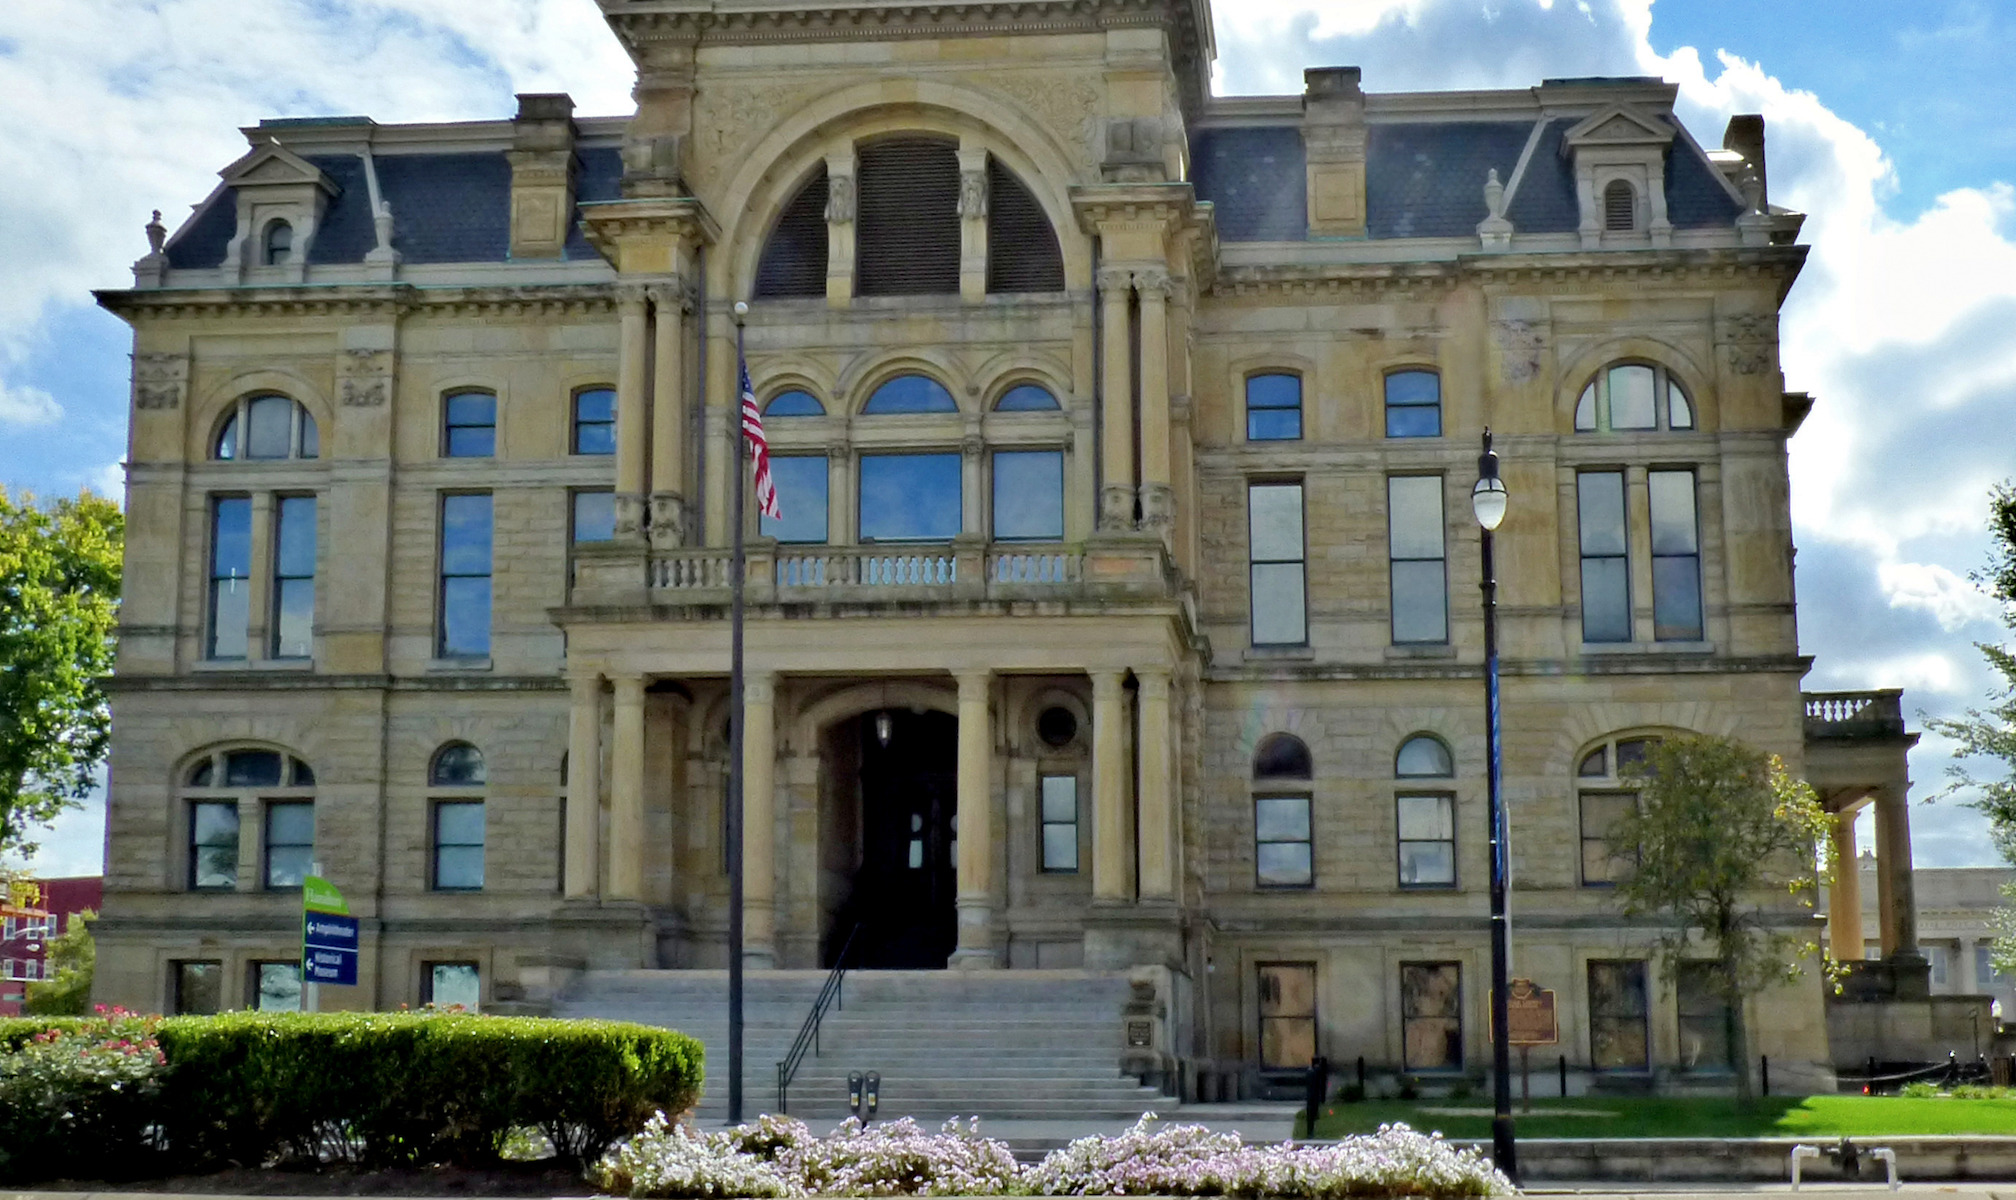 Butler County Courthouse in Hamilton, Ohio, Sept. 28, 2015. (Greg Hume via Creative Commons)